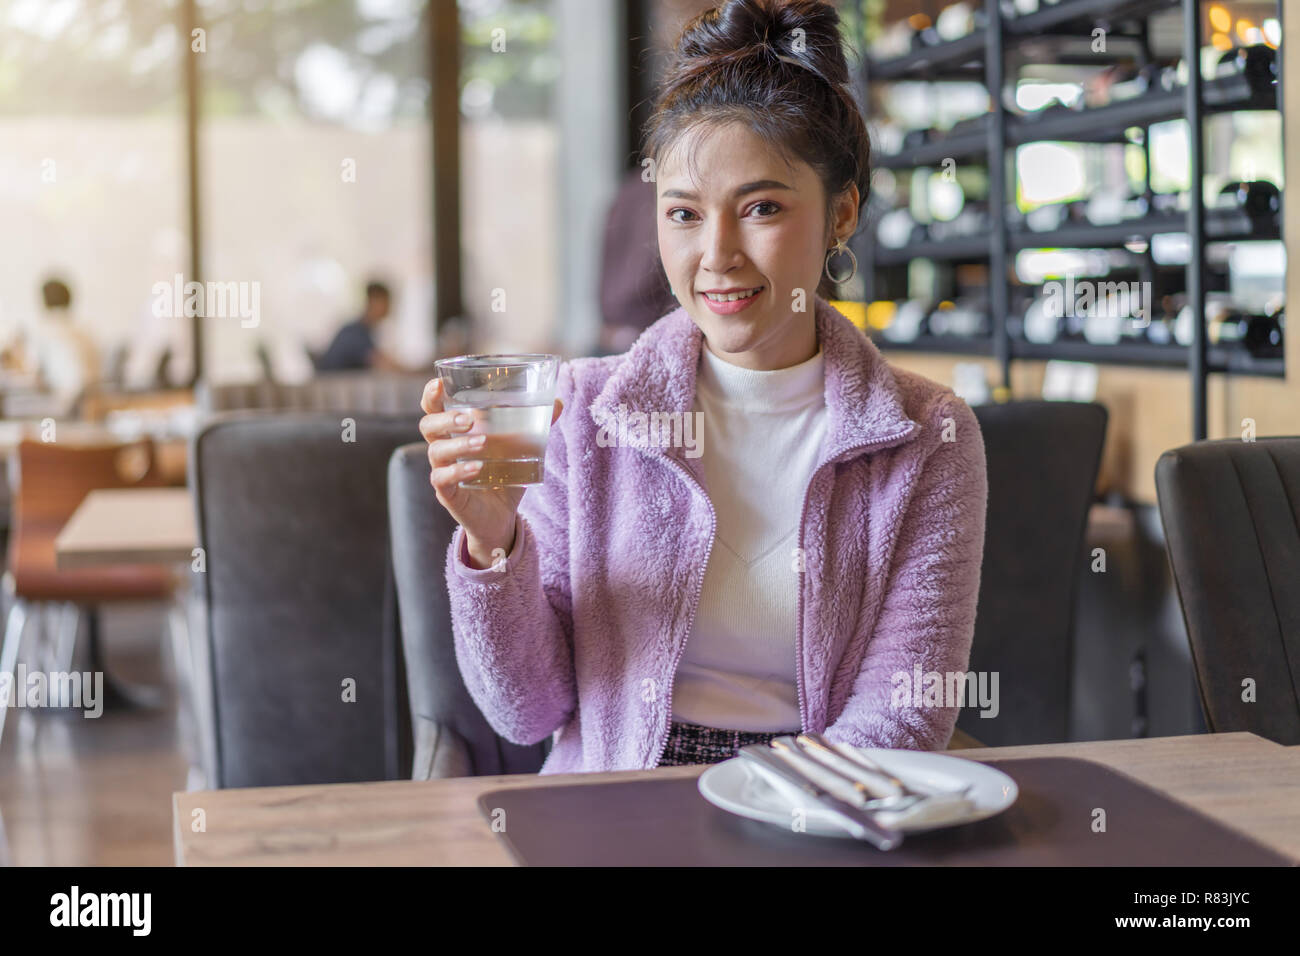 beautiful woman drinking a glass of water in restaurant Stock Photo